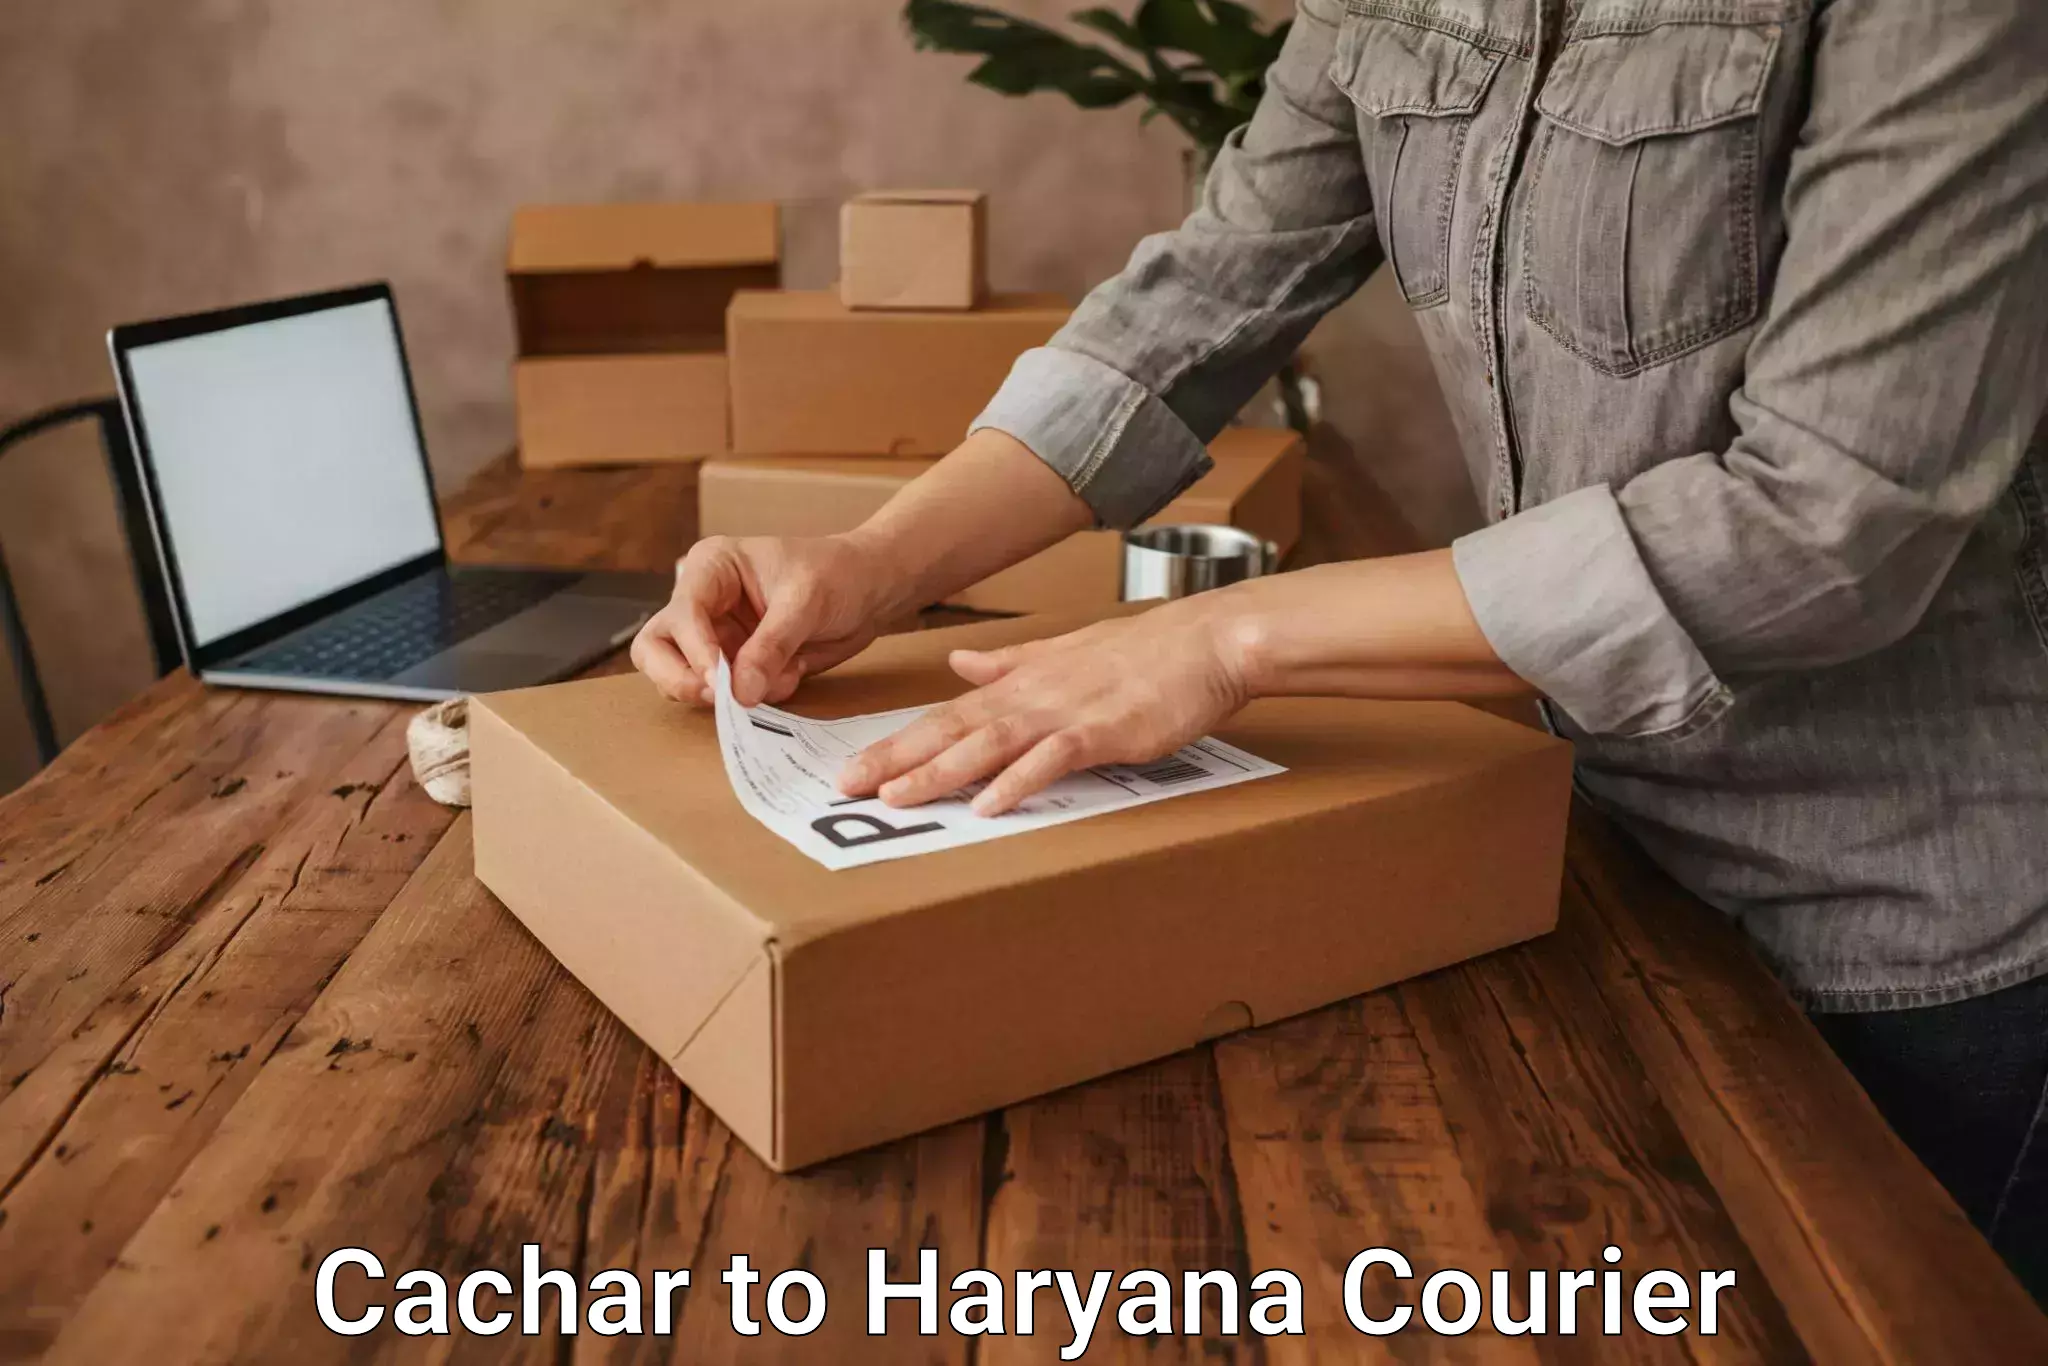 Reliable delivery network Cachar to Haryana